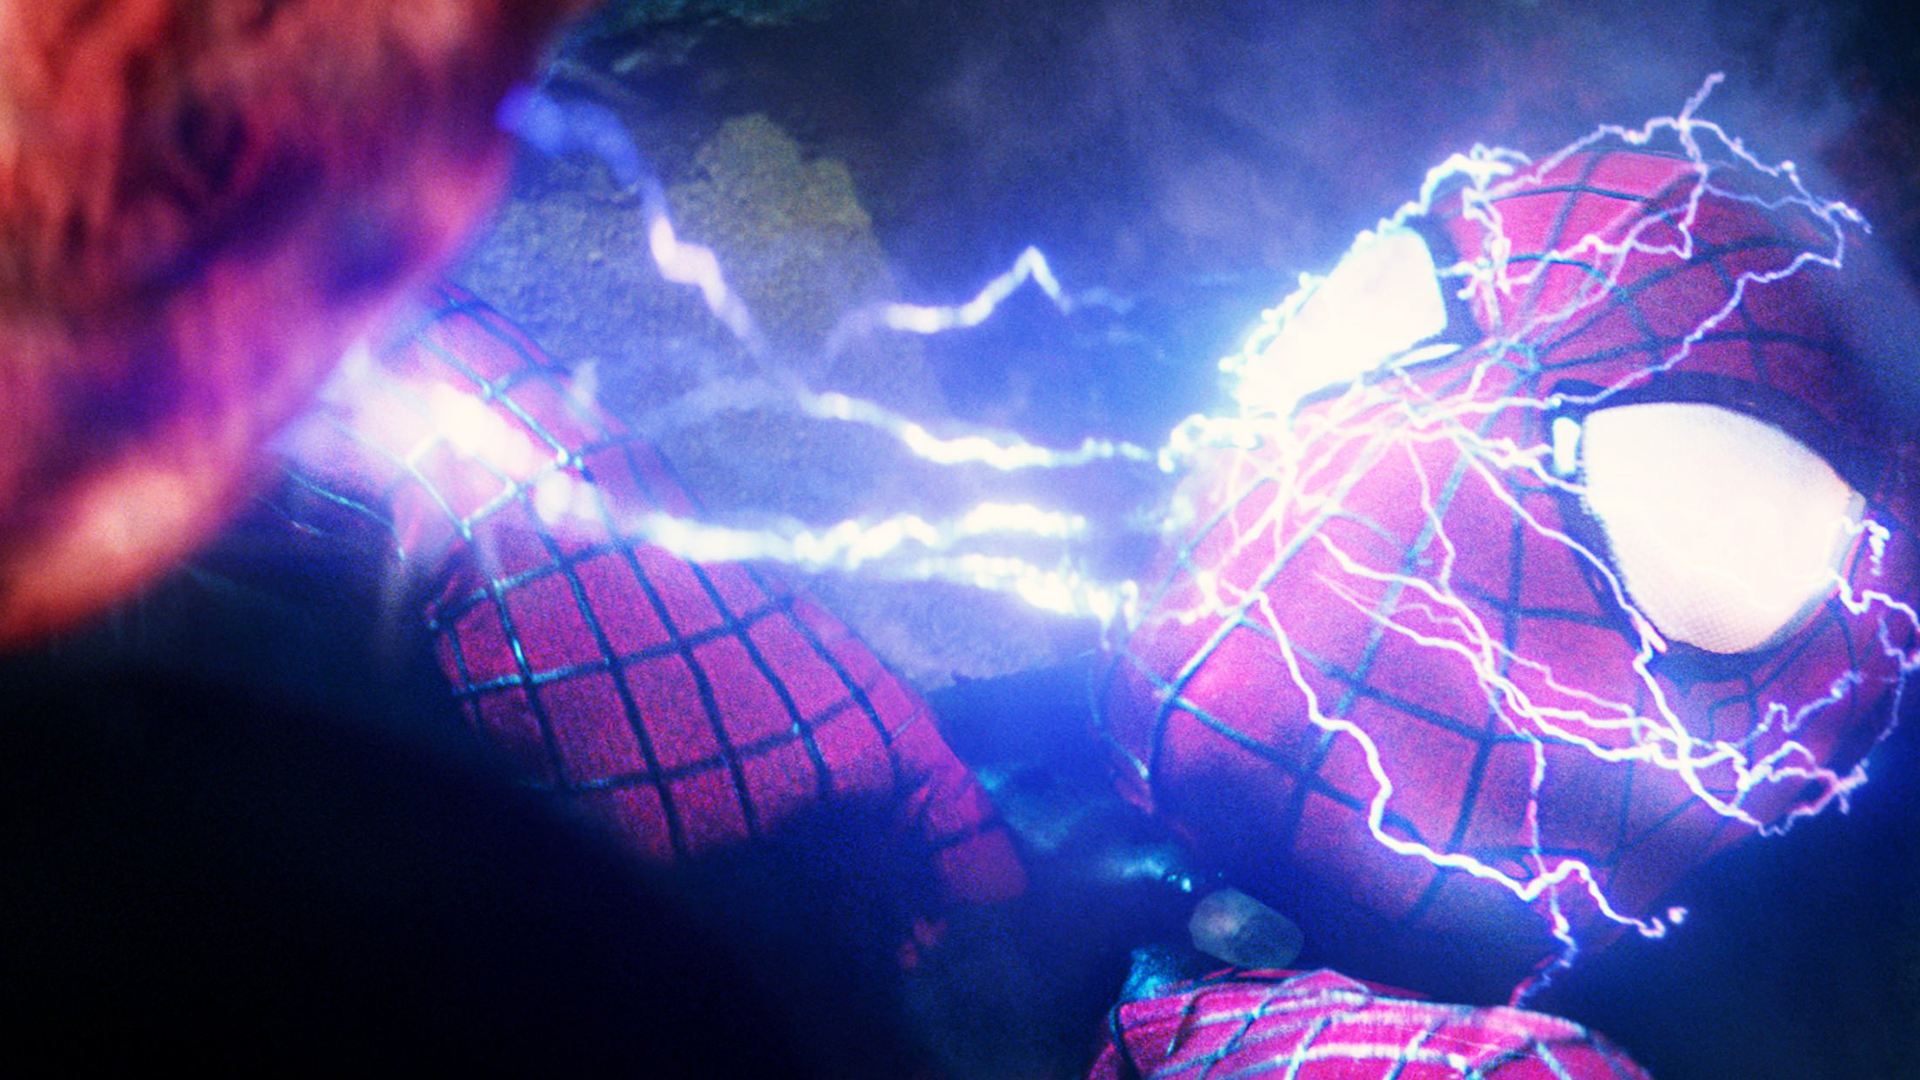 Free download electro vs the amazing spider man 2 movie HD 1920x1080 1080p wallpaper [1920x1080] for your Desktop, Mobile & Tablet. Explore Spider Man HD Wallpaper 1080p